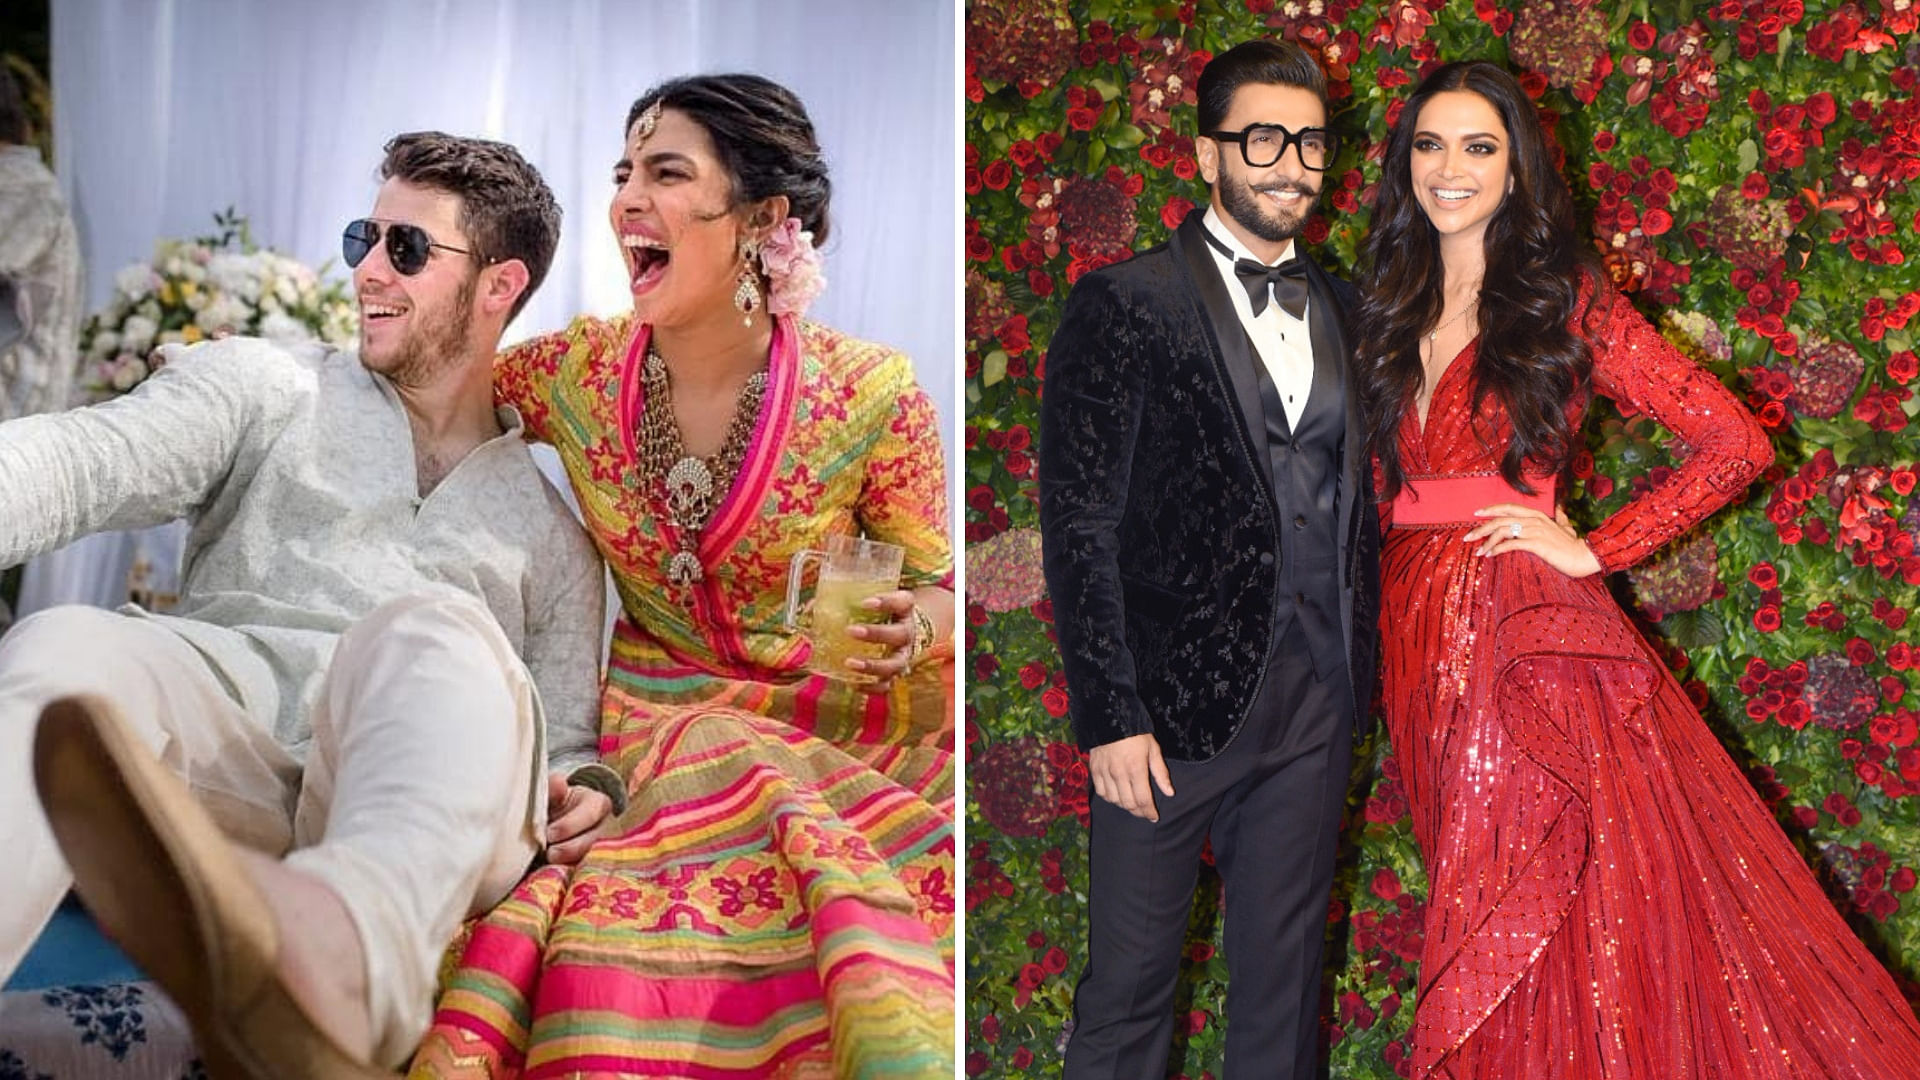 The end of the 2018 has seen two big Bollywood weddings.